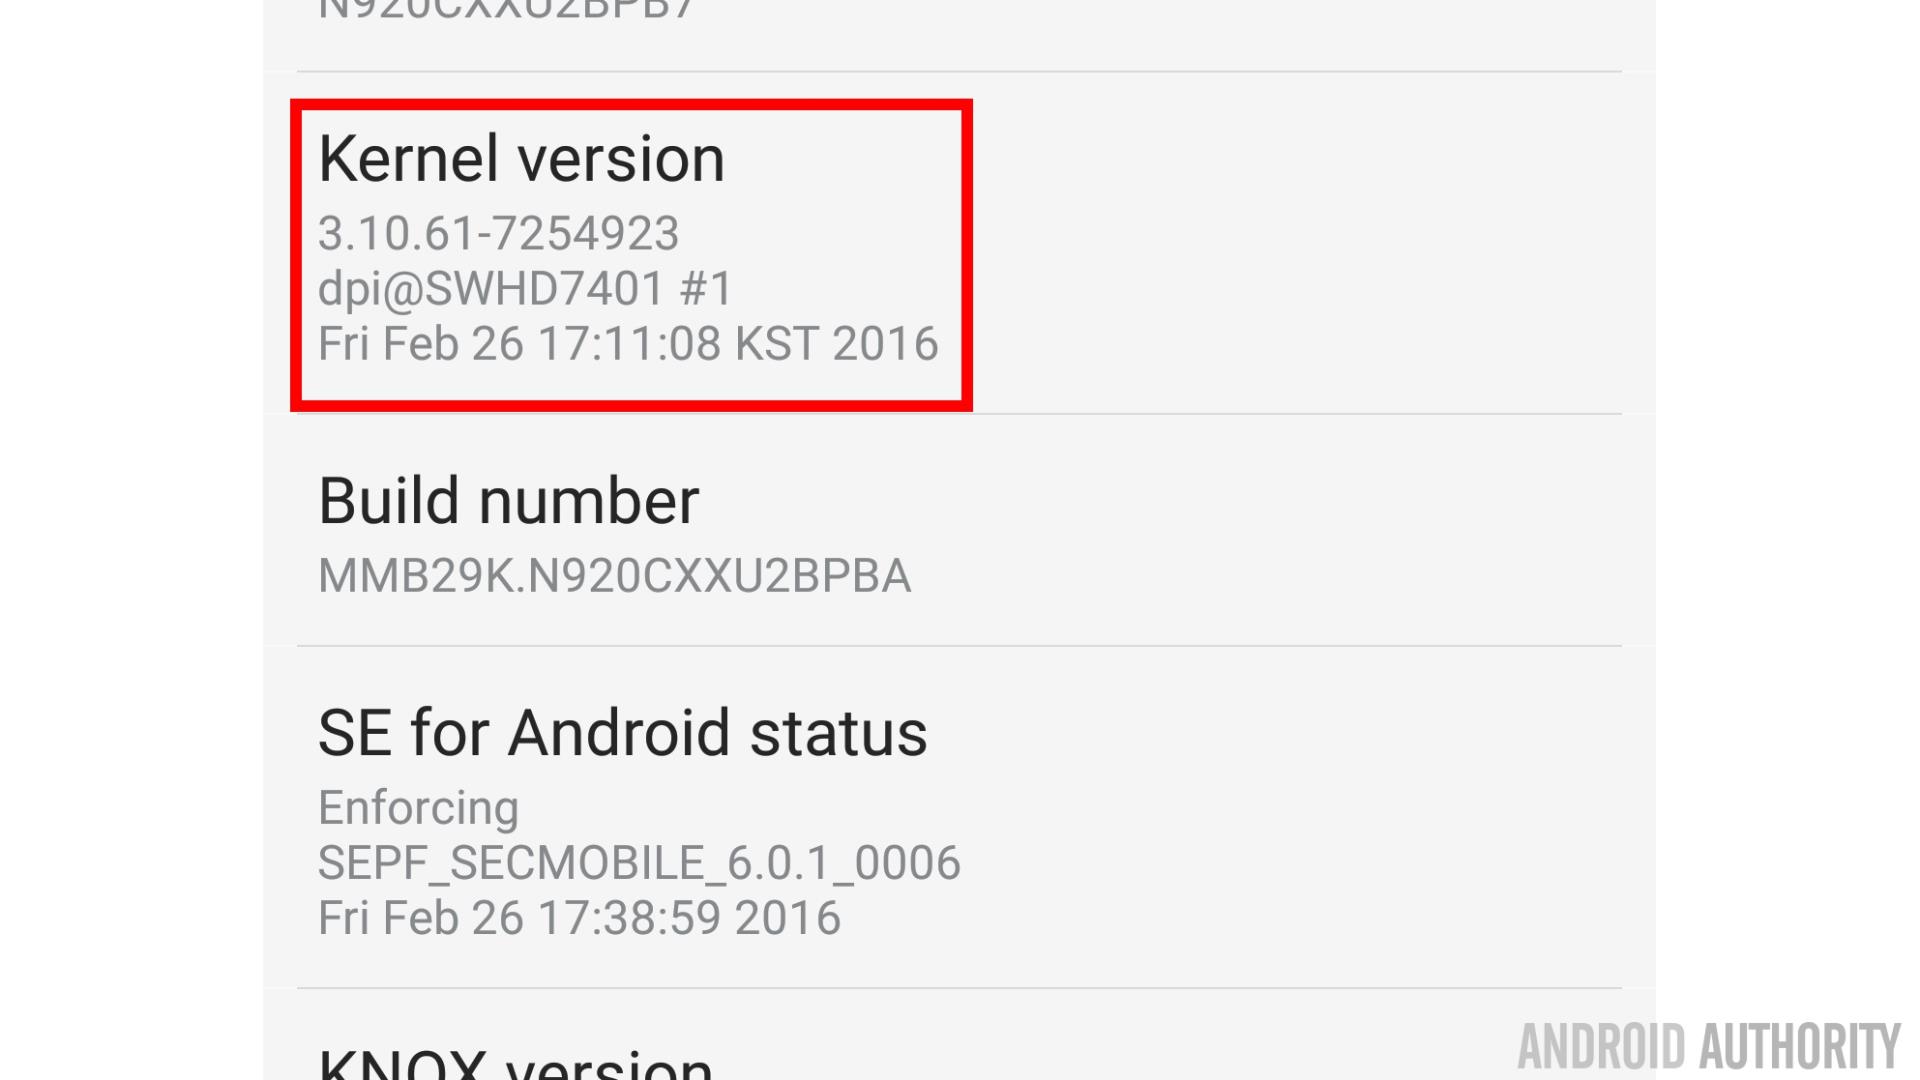 android-kernel-version-16x9-1080p